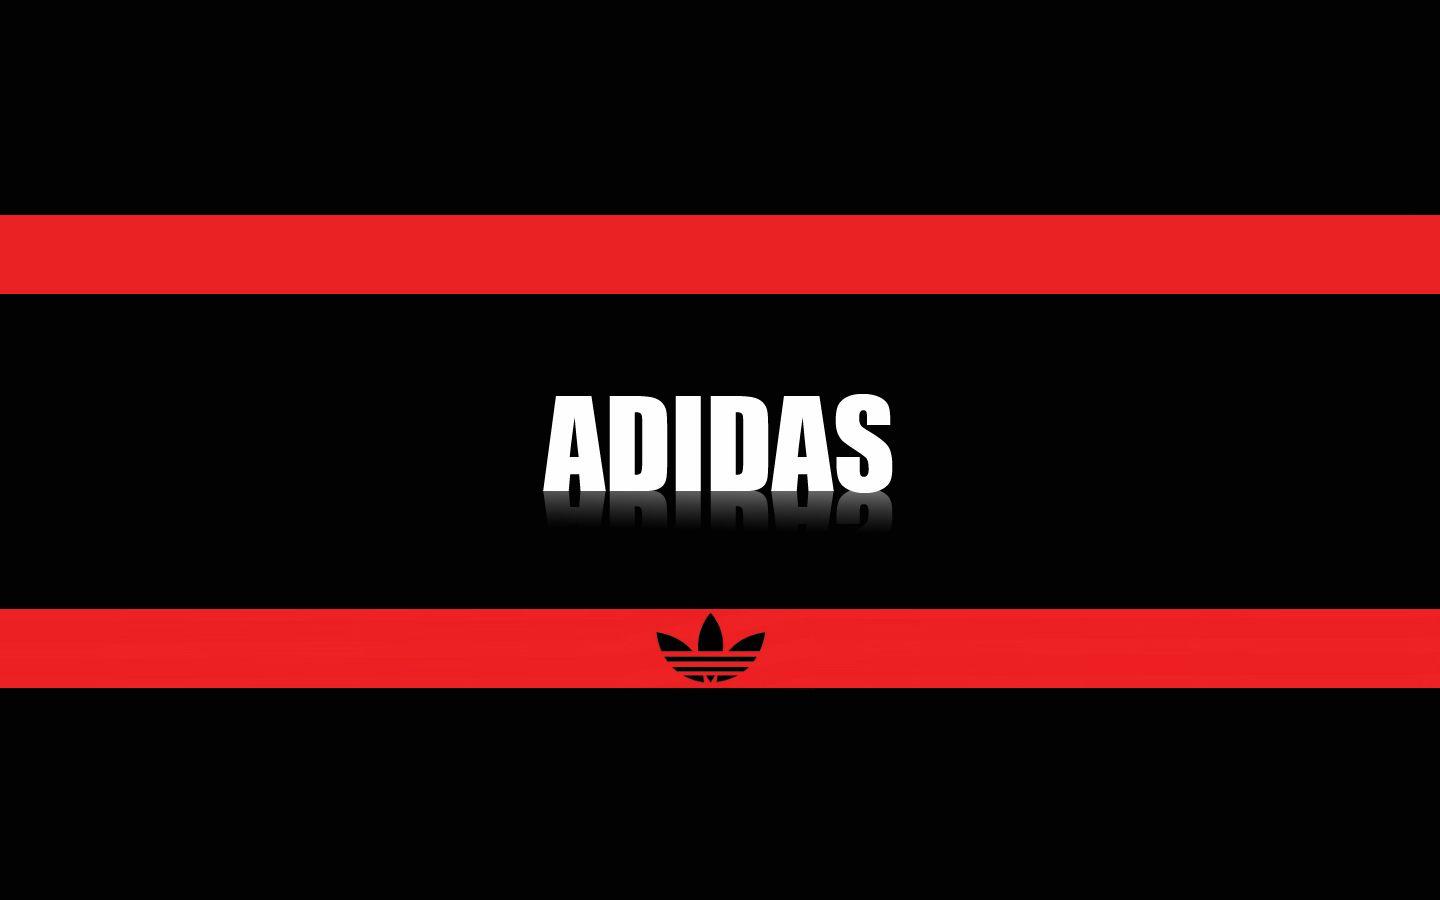 Adidas 4k Wallpaper Download For Pc, Adidas, Other